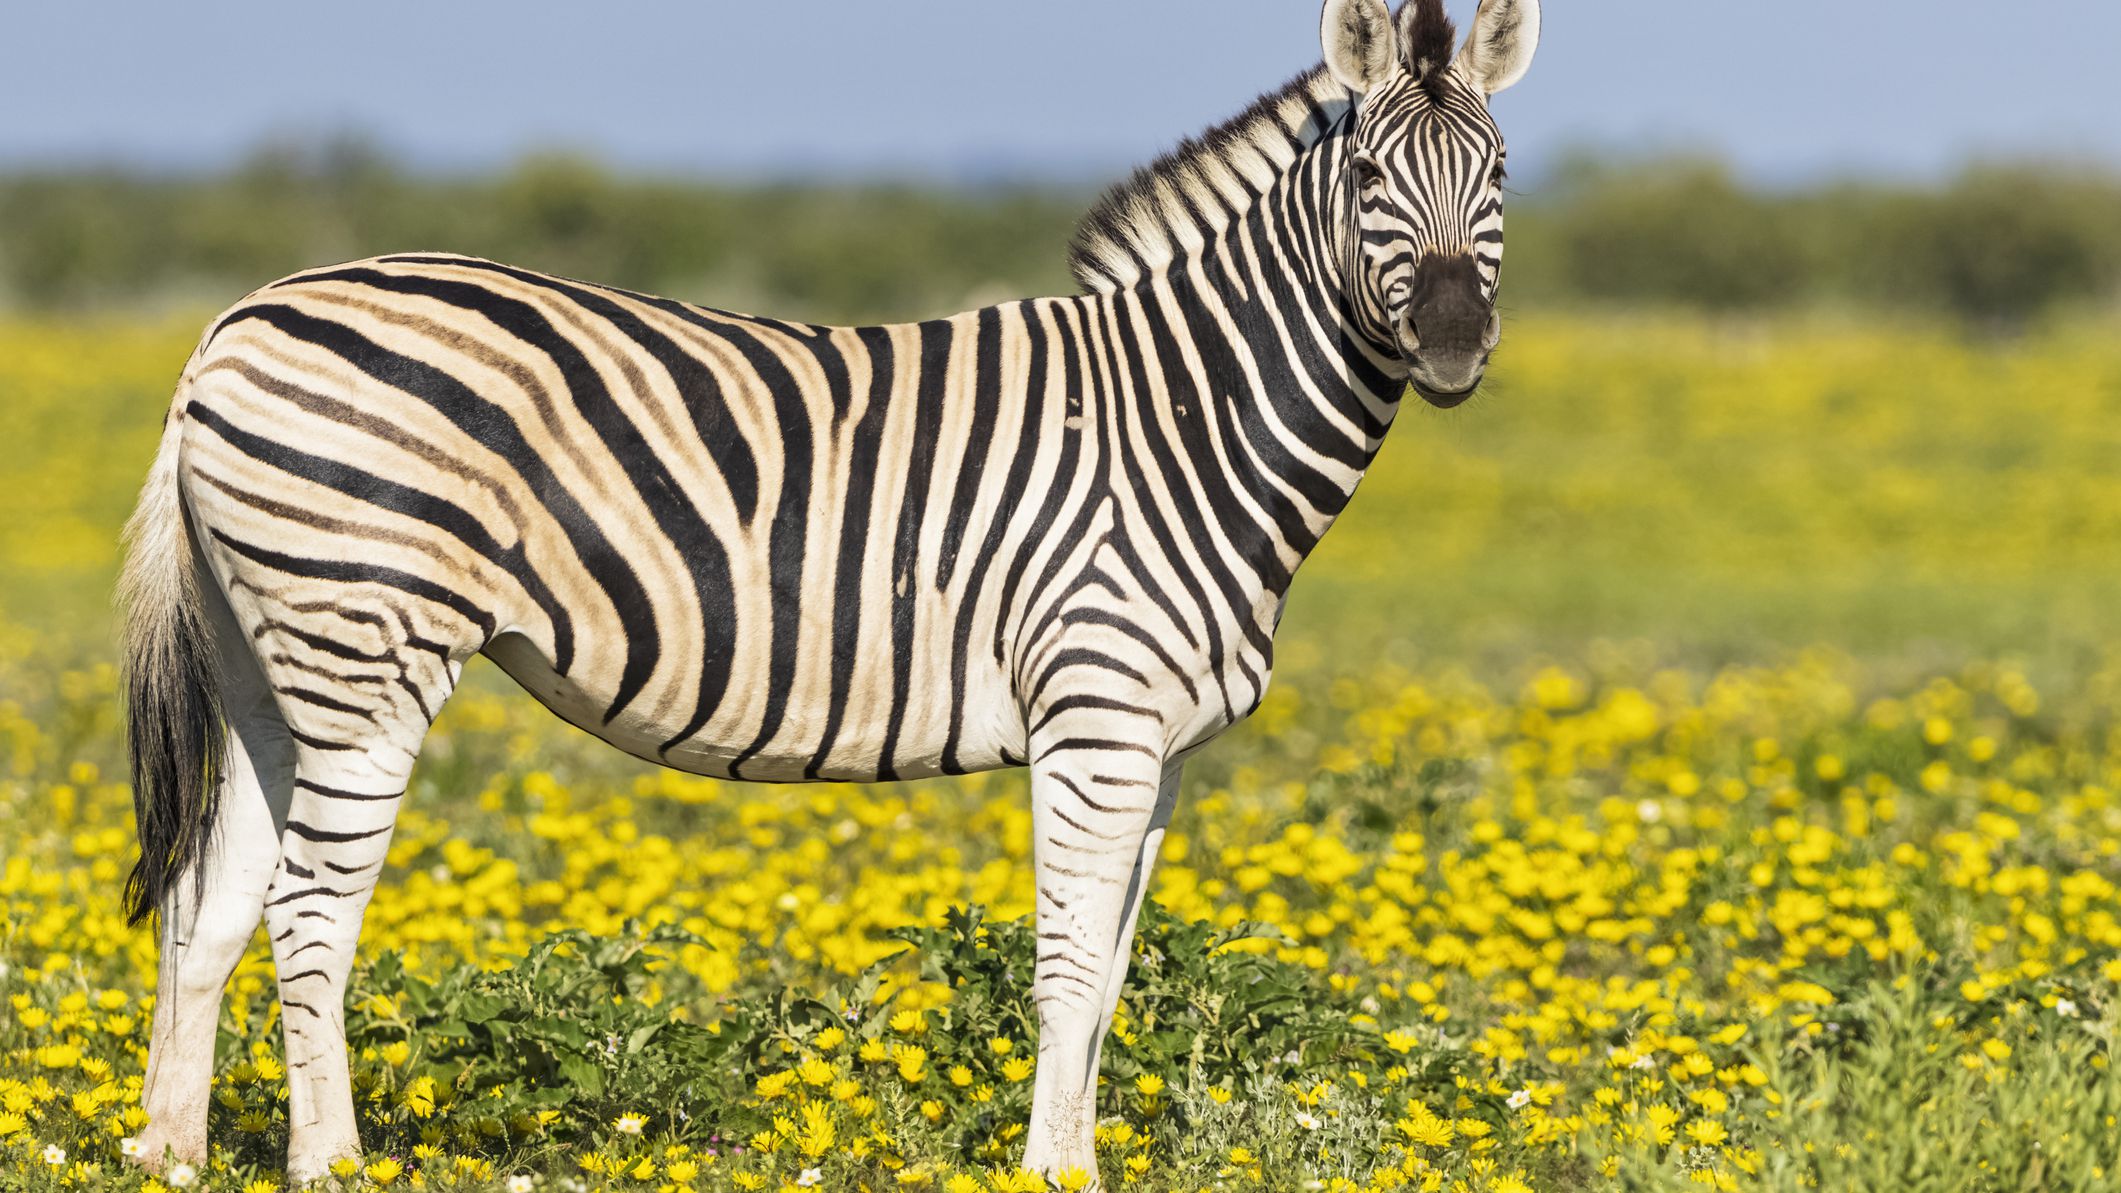 What are 10 interesting facts about zebras?